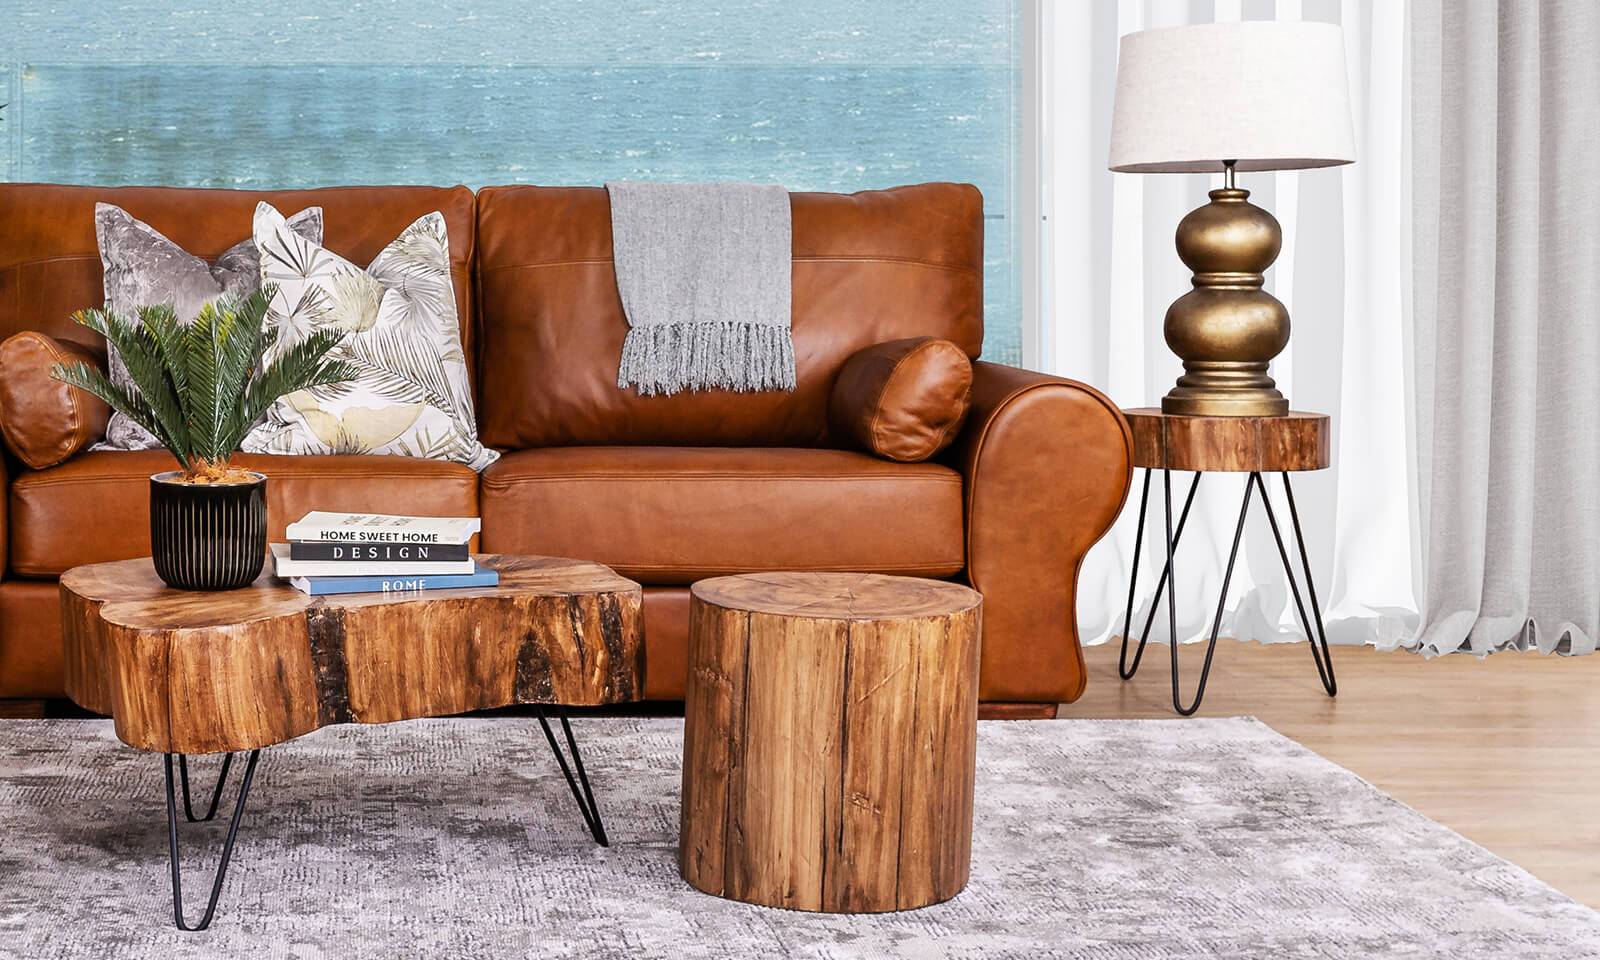 HOW TO FIND QUALITY WOODEN FURNITURE